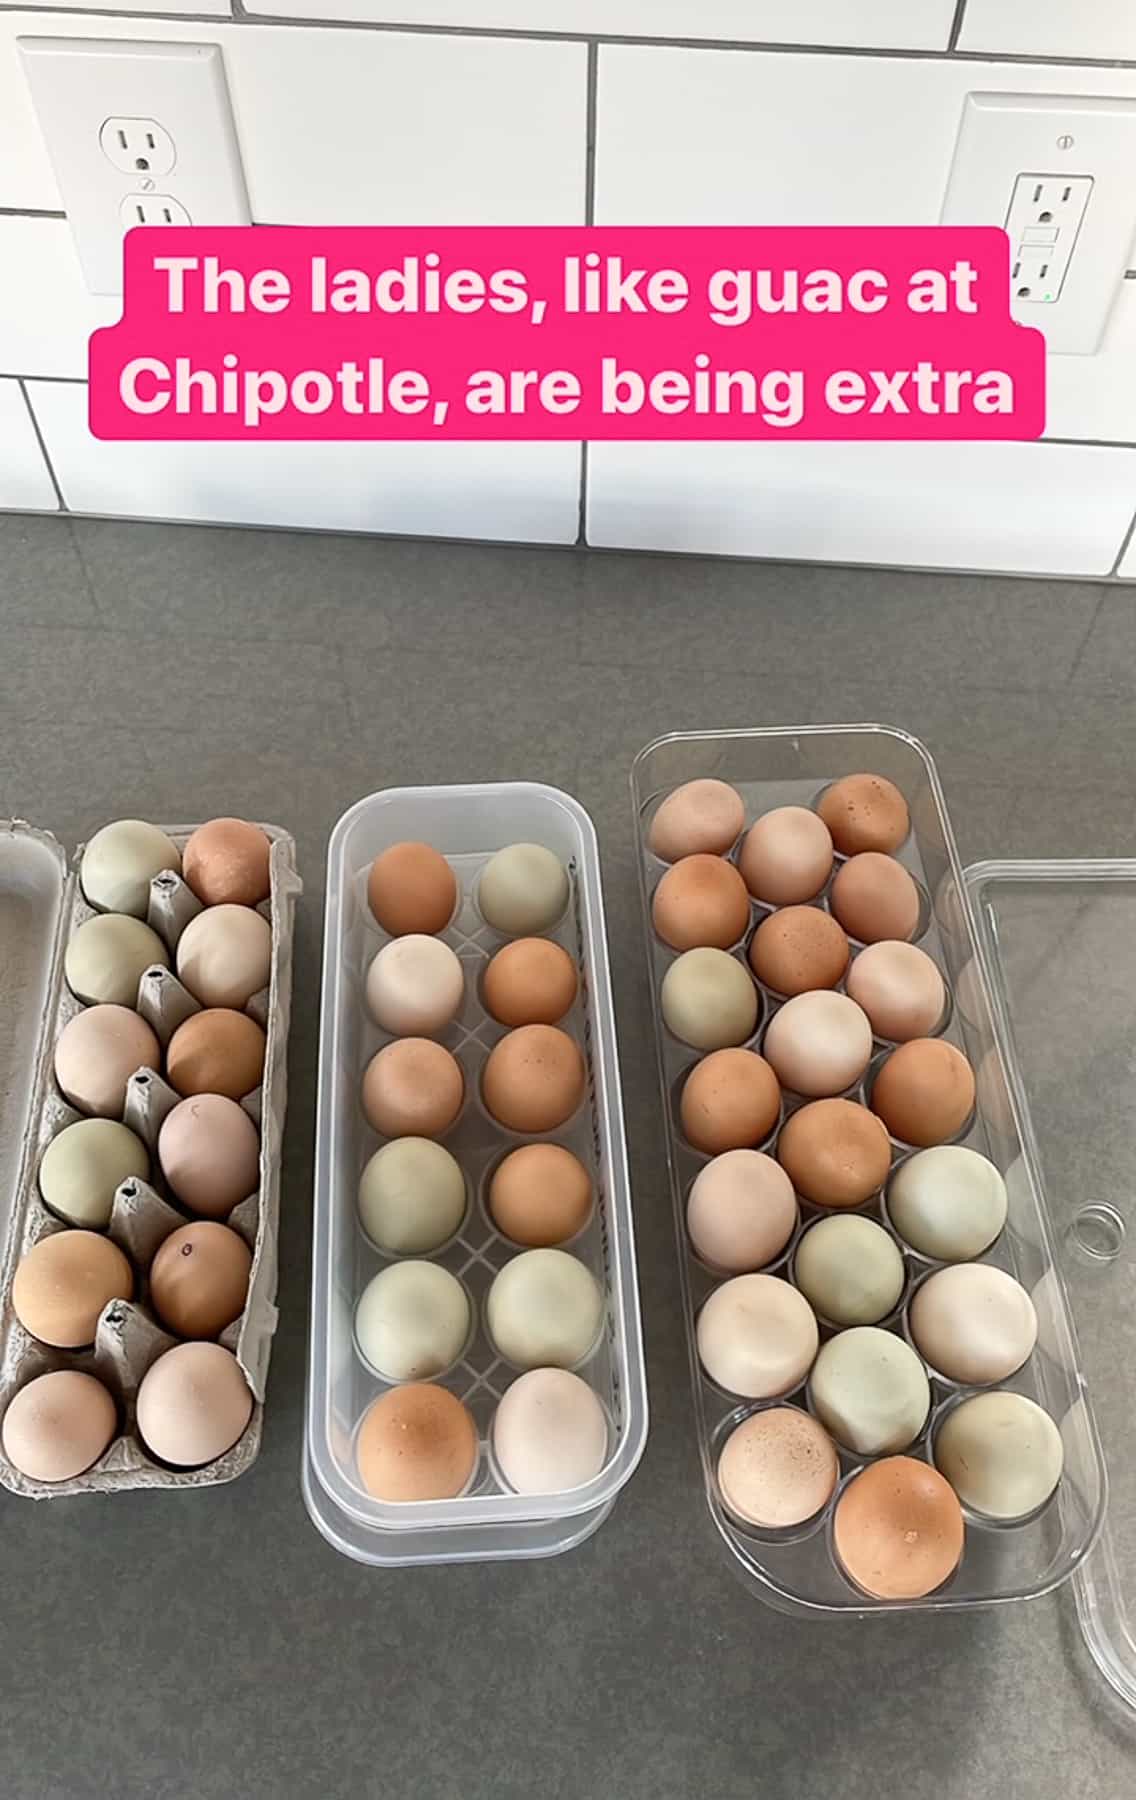 multiple cartons of eggs on a kitchen counter.